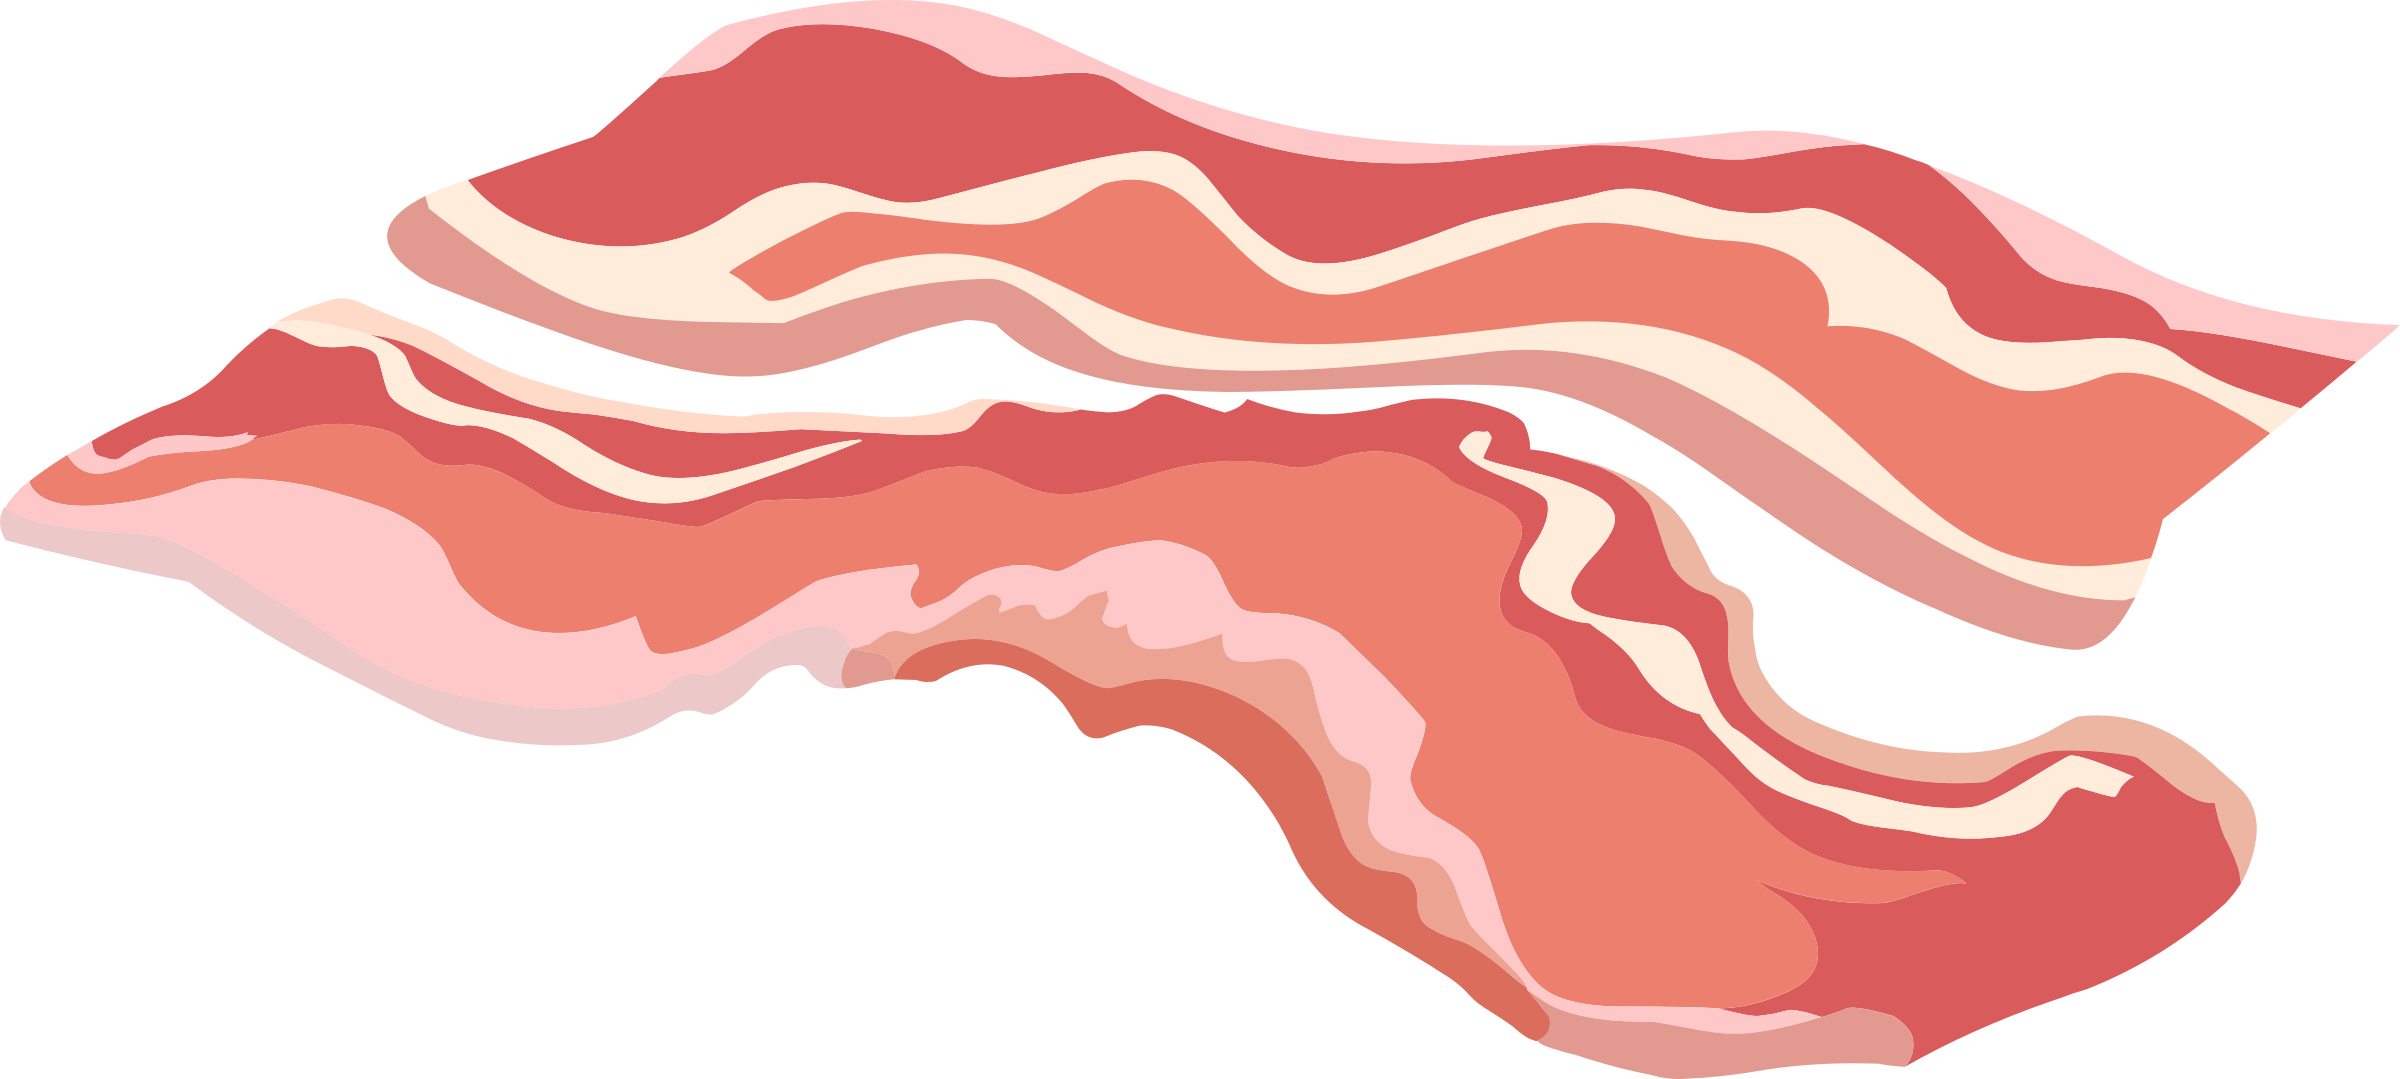 Bacon clipart transparent background. Egg and cheese sandwich